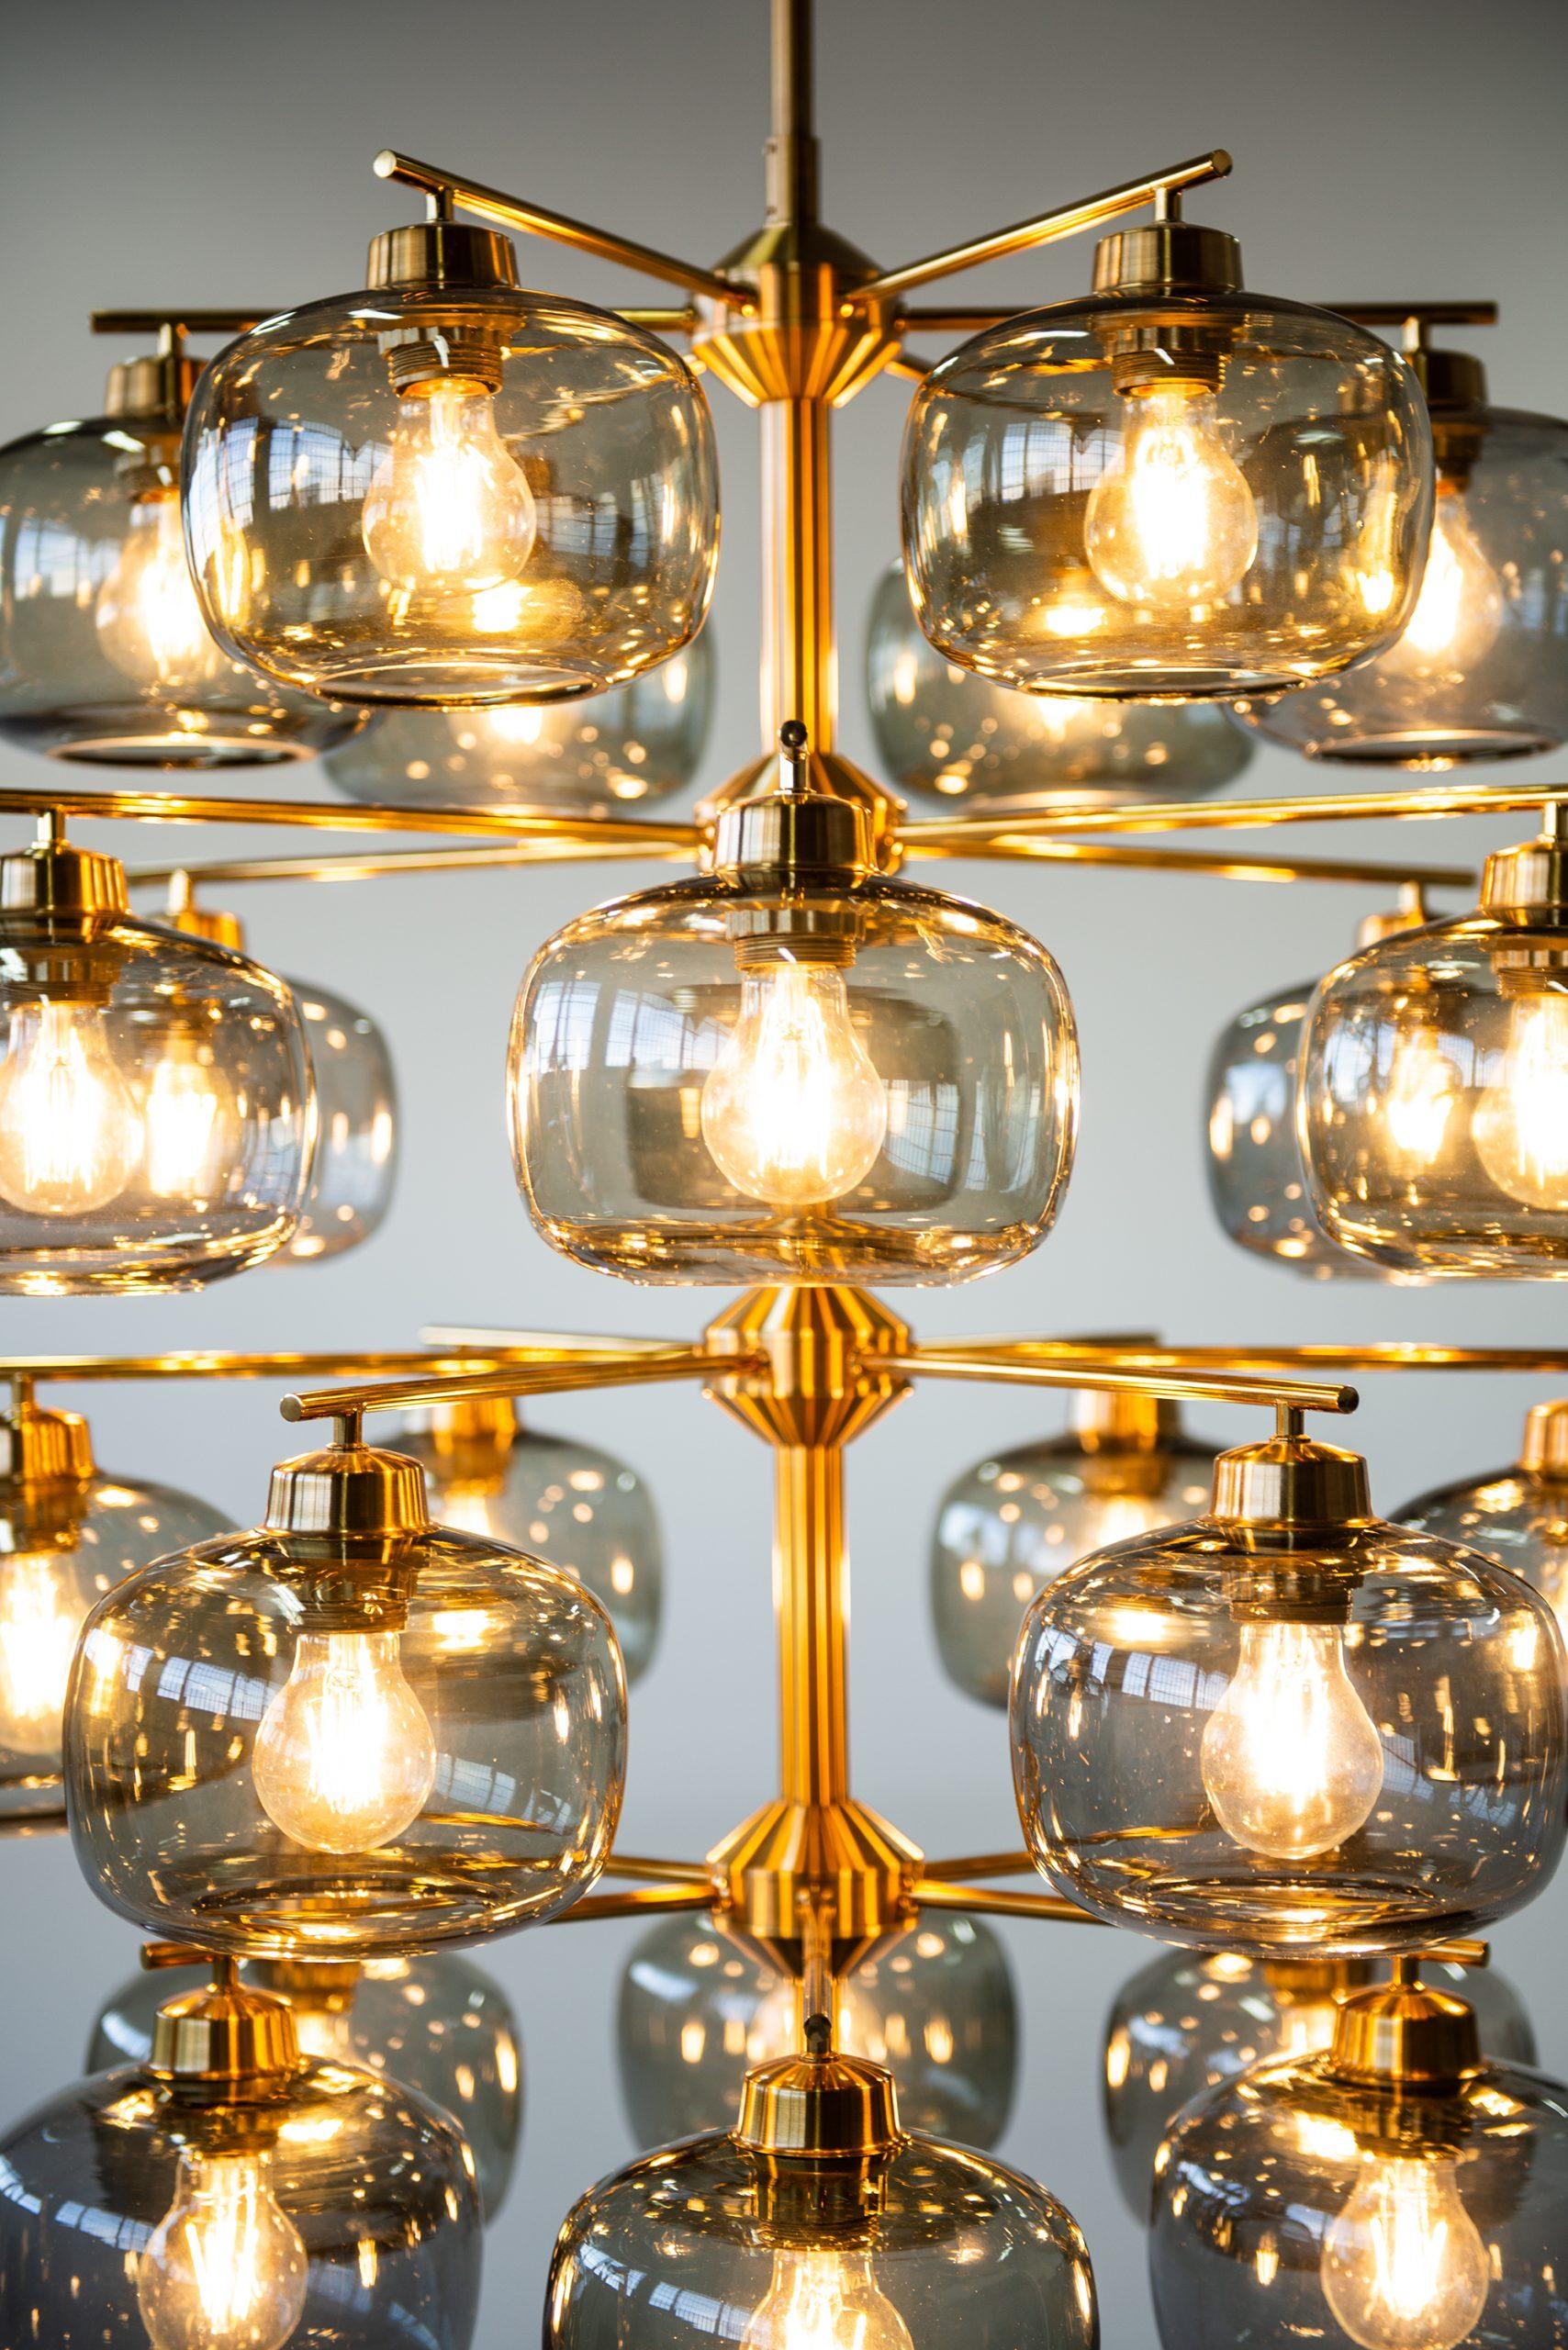 Brass Holger Johansson Ceiling Lamp Produced by Westal in Sweden